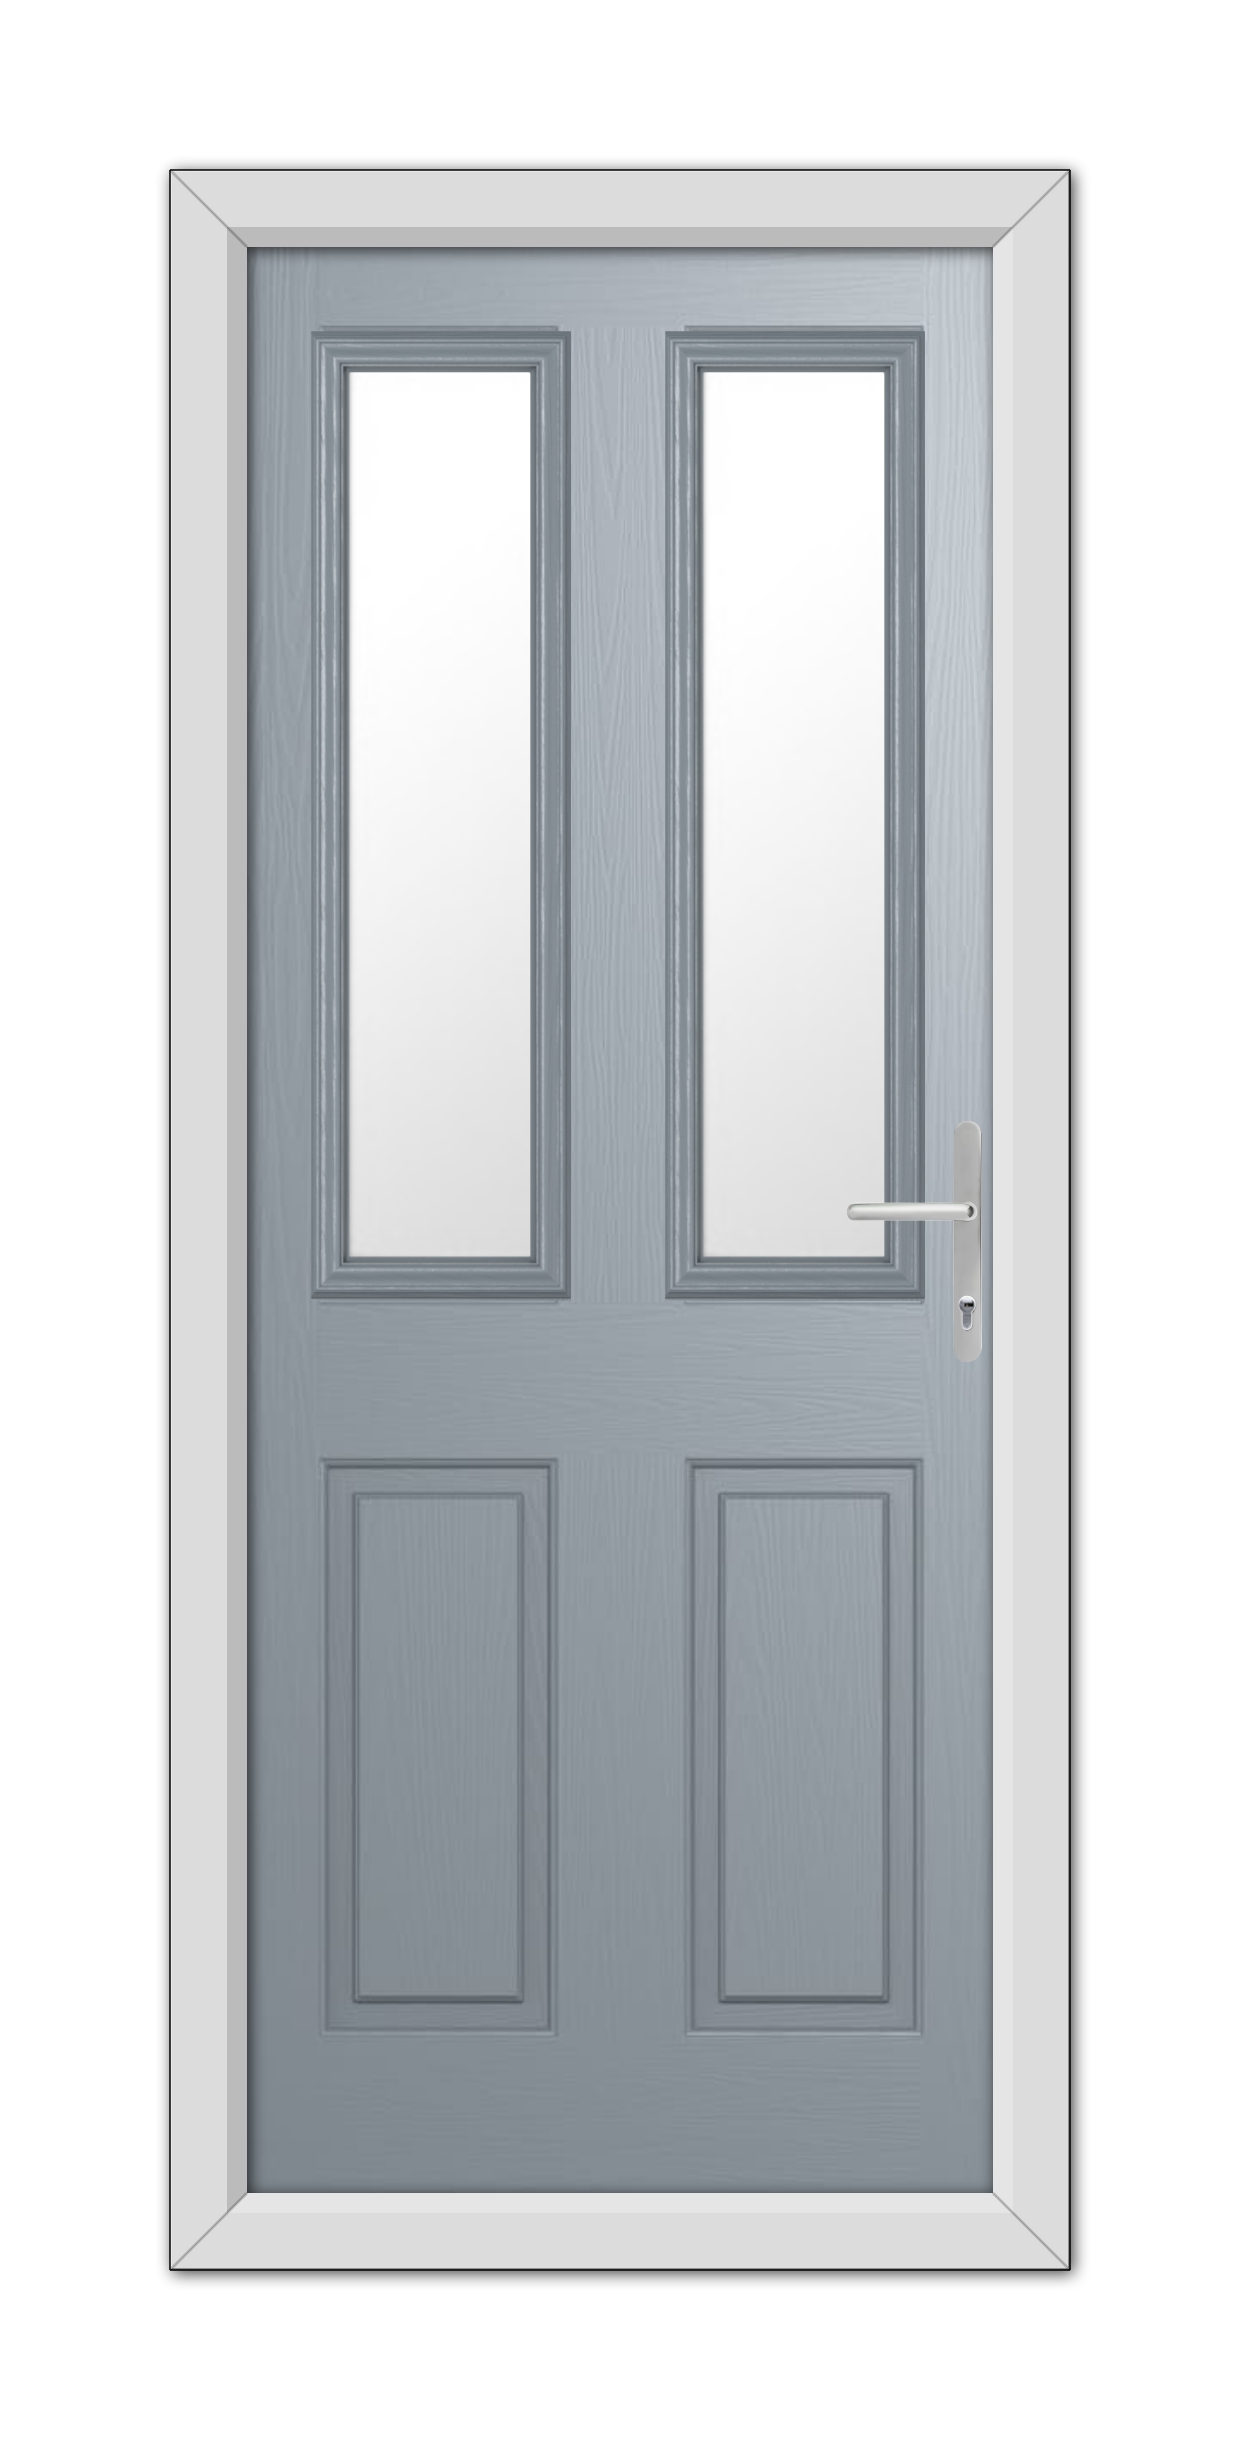 A French Grey Whitmore Composite Door 48mm Timber Core with frosted glass panels and a silver handle, set in a white frame.